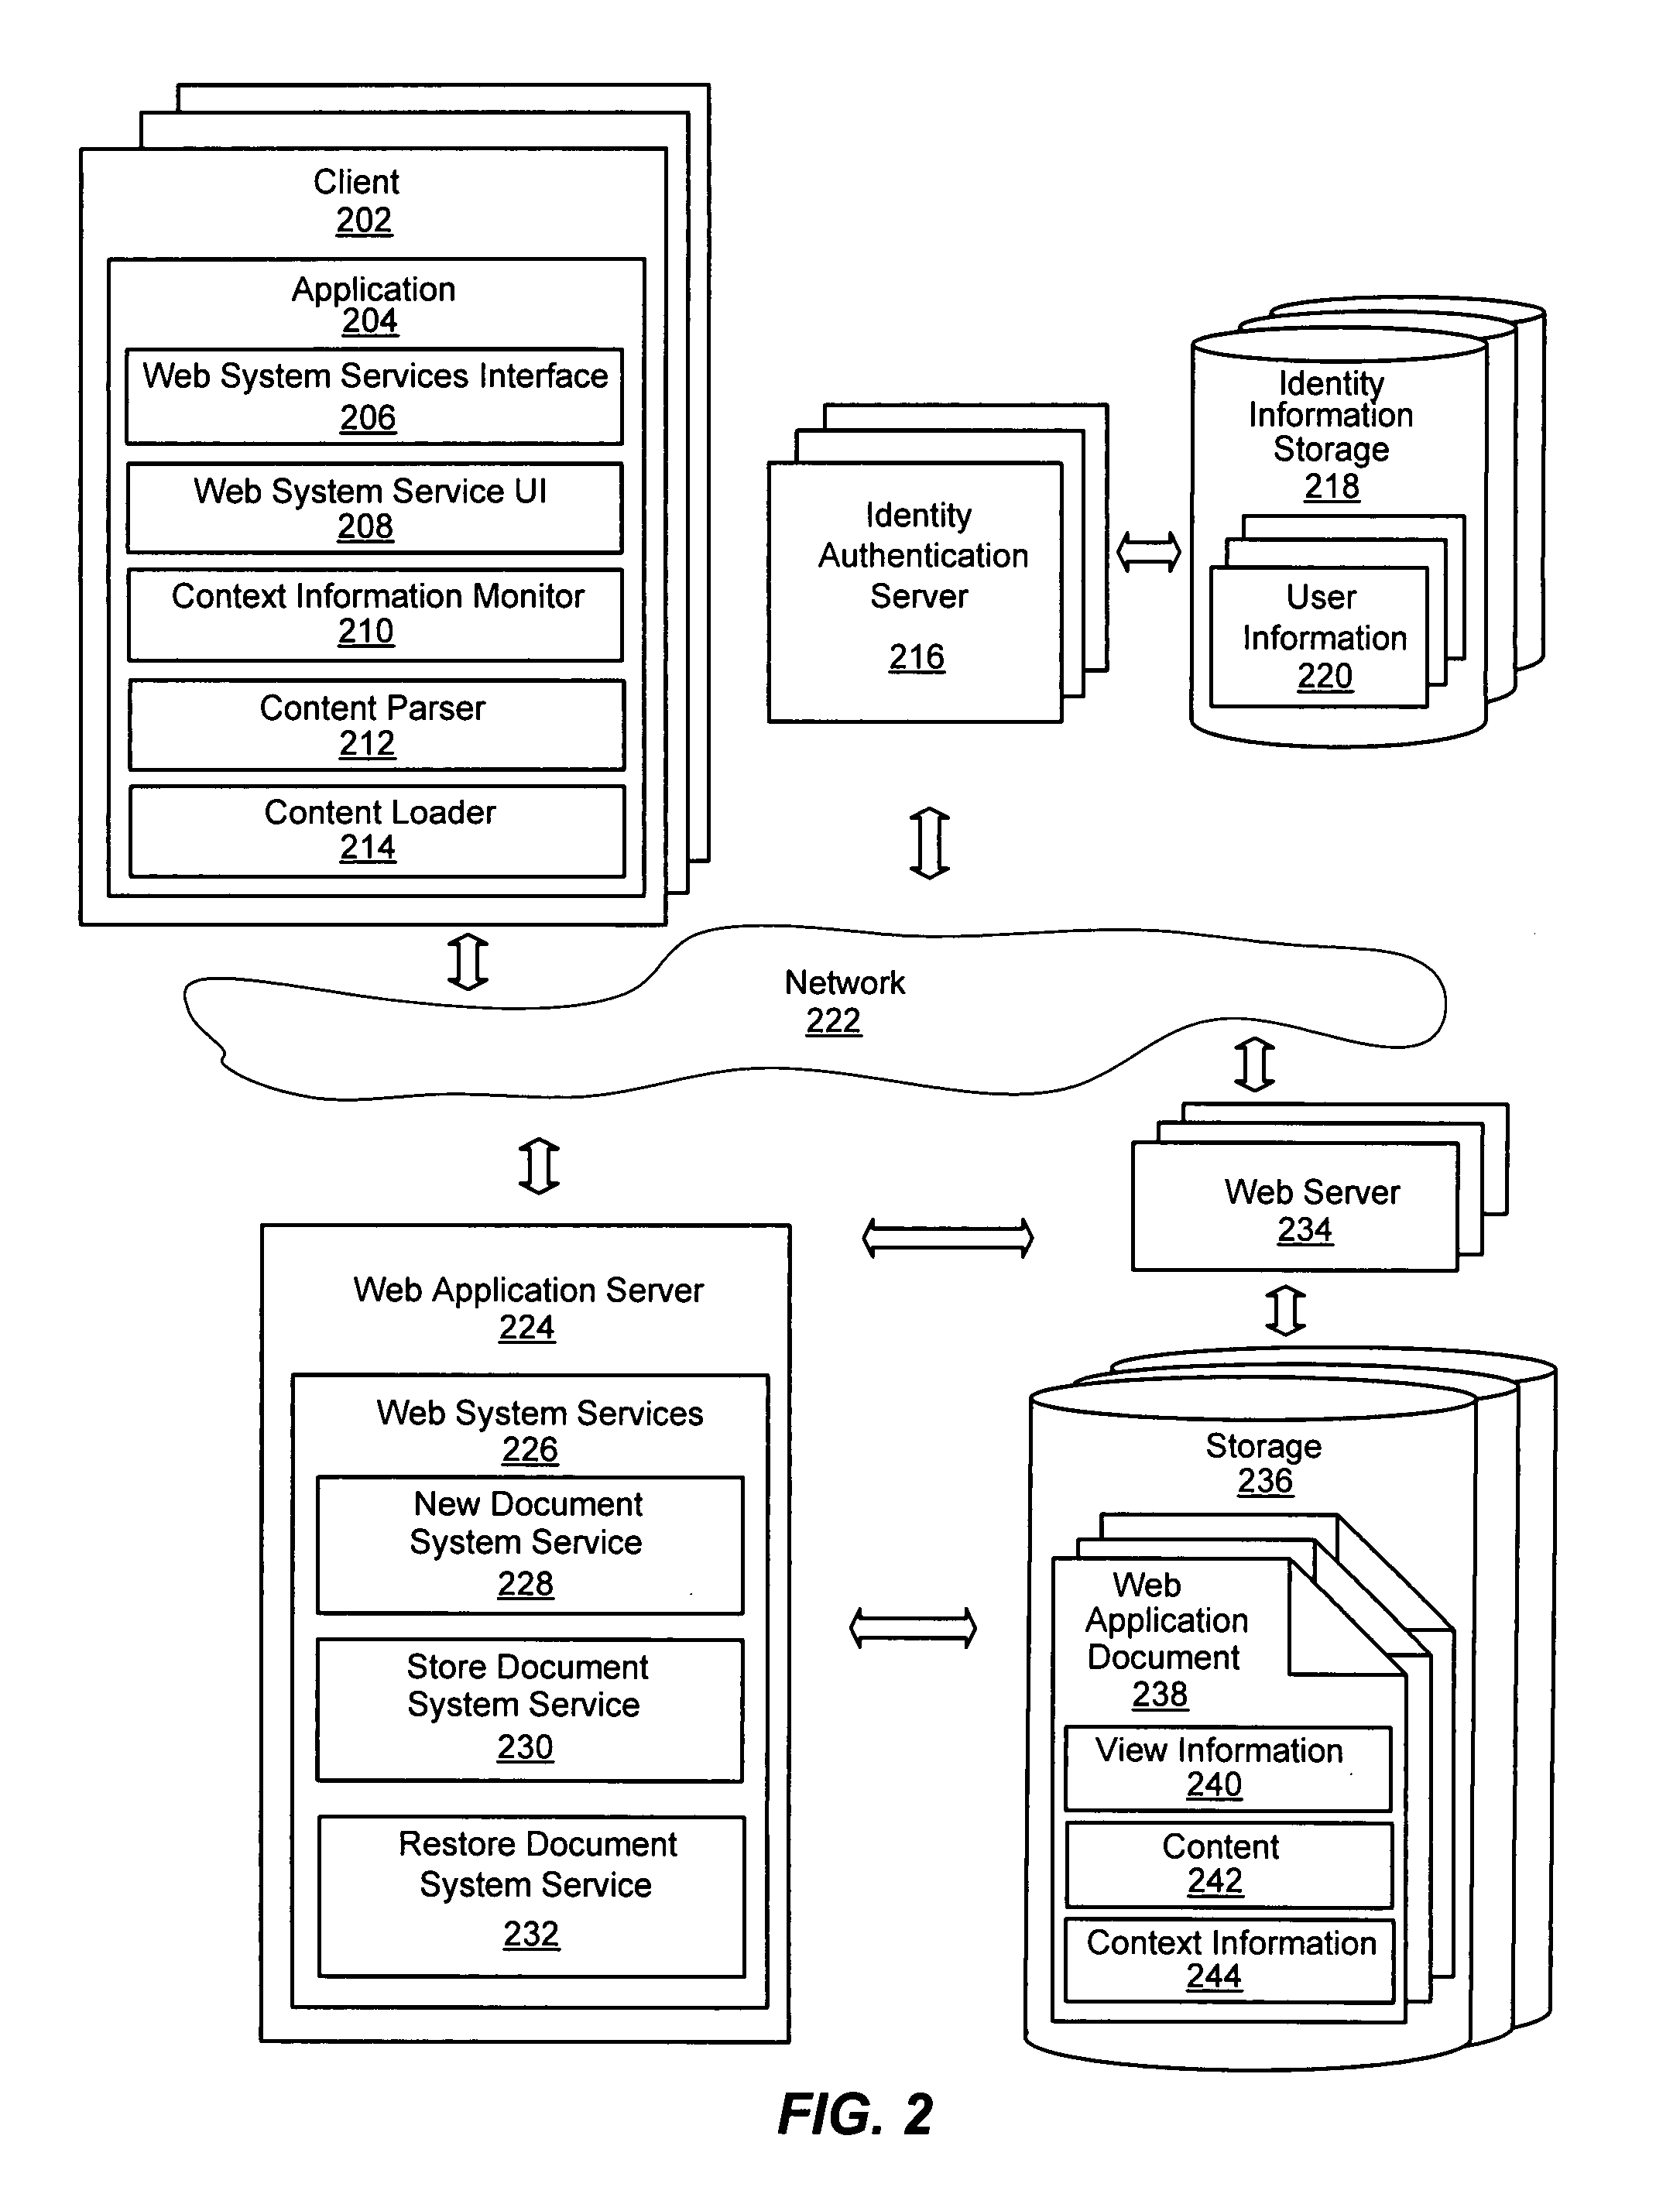 System and method of providing context information for client application data stored on the web